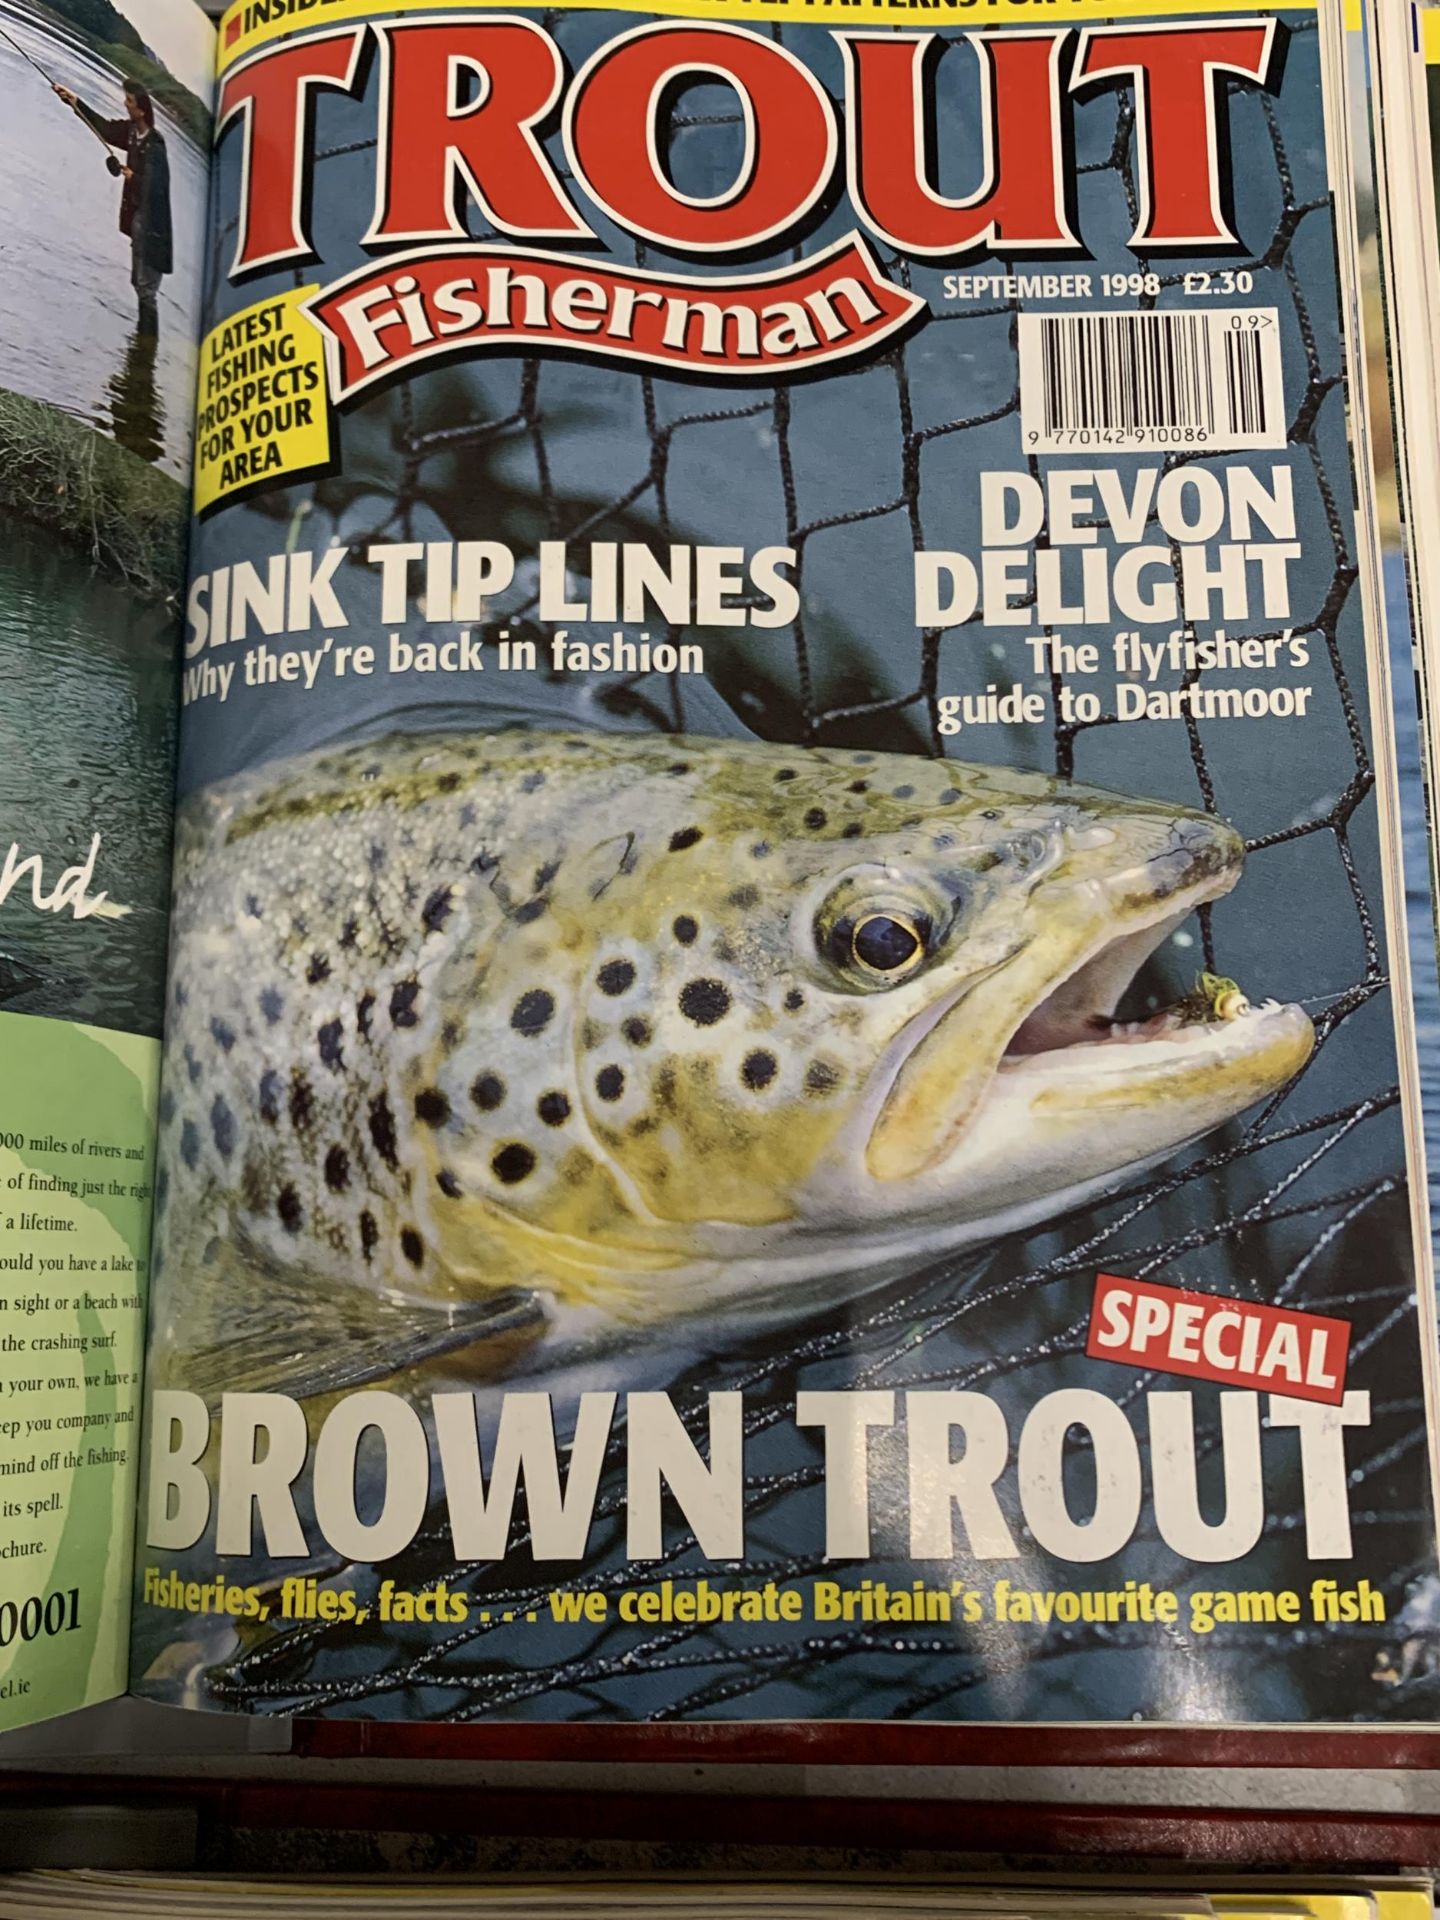 A LARGE COLLECTION OF FISHING MAGAZINES TO INCLUDE "TROUT FISHERMAN" AND "FLY FISHING AND FLY TYING" - Image 6 of 6